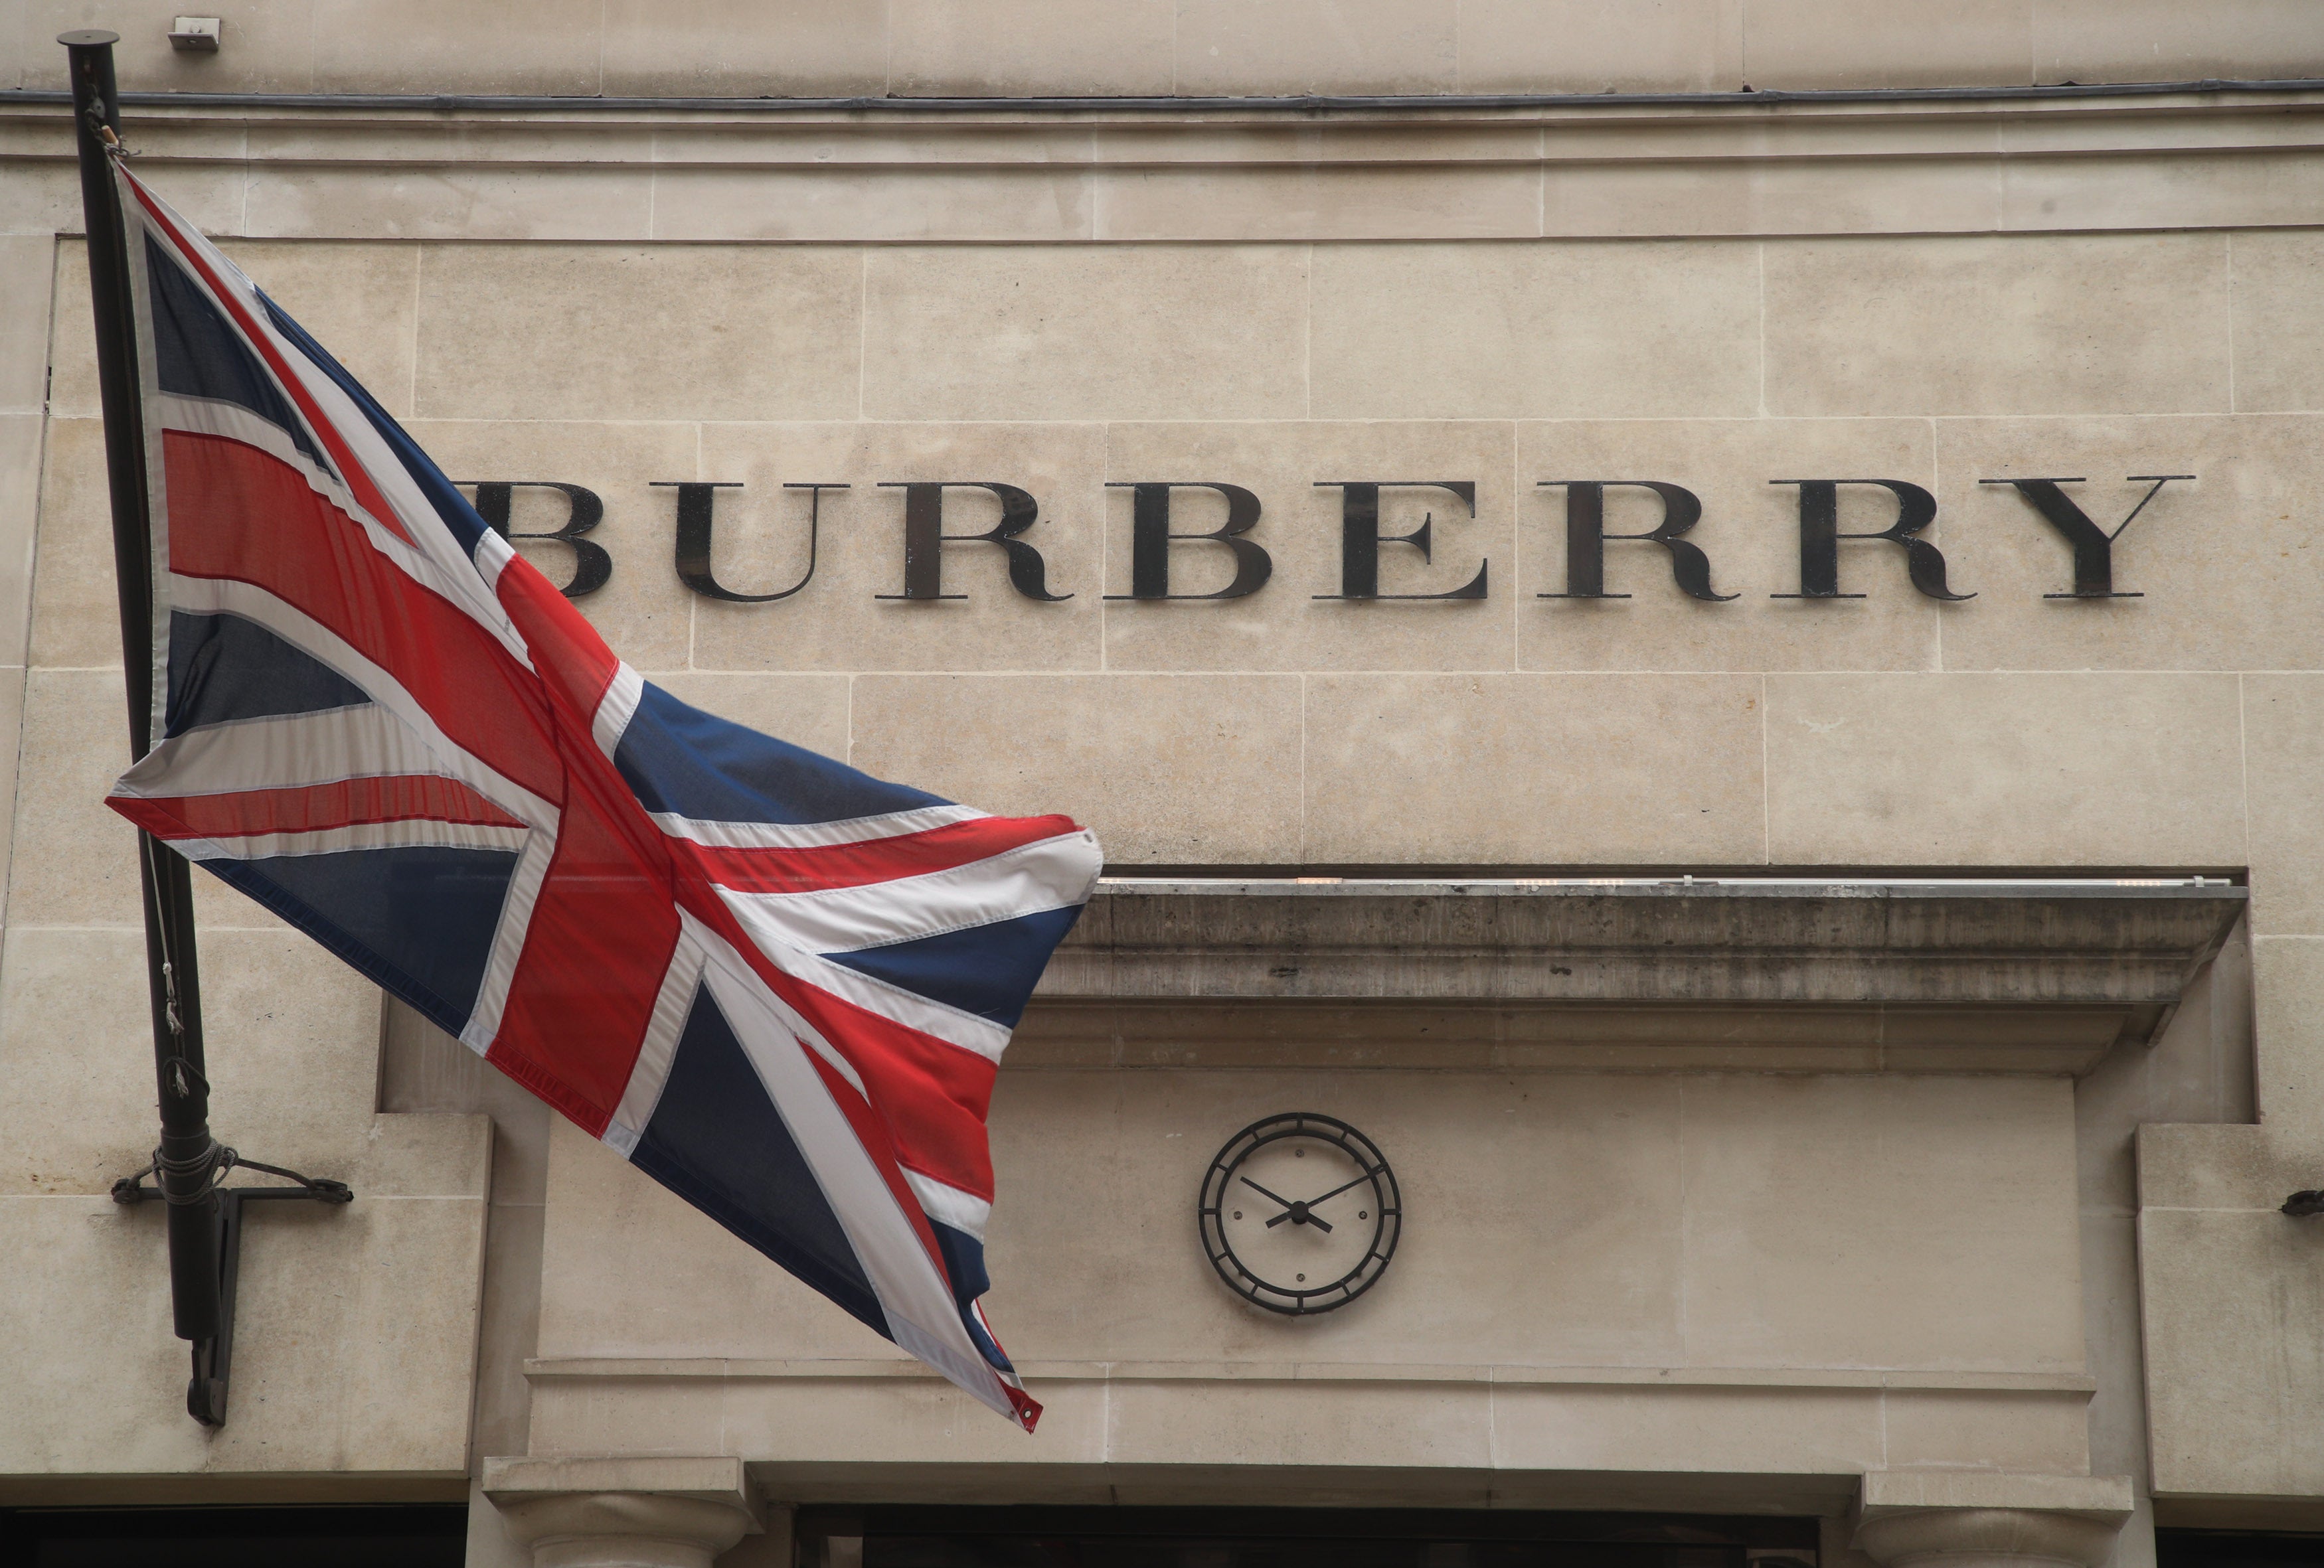 Burberry said its performance in China has been encouraging since shops reopened in June. (Yui Mok/PA)